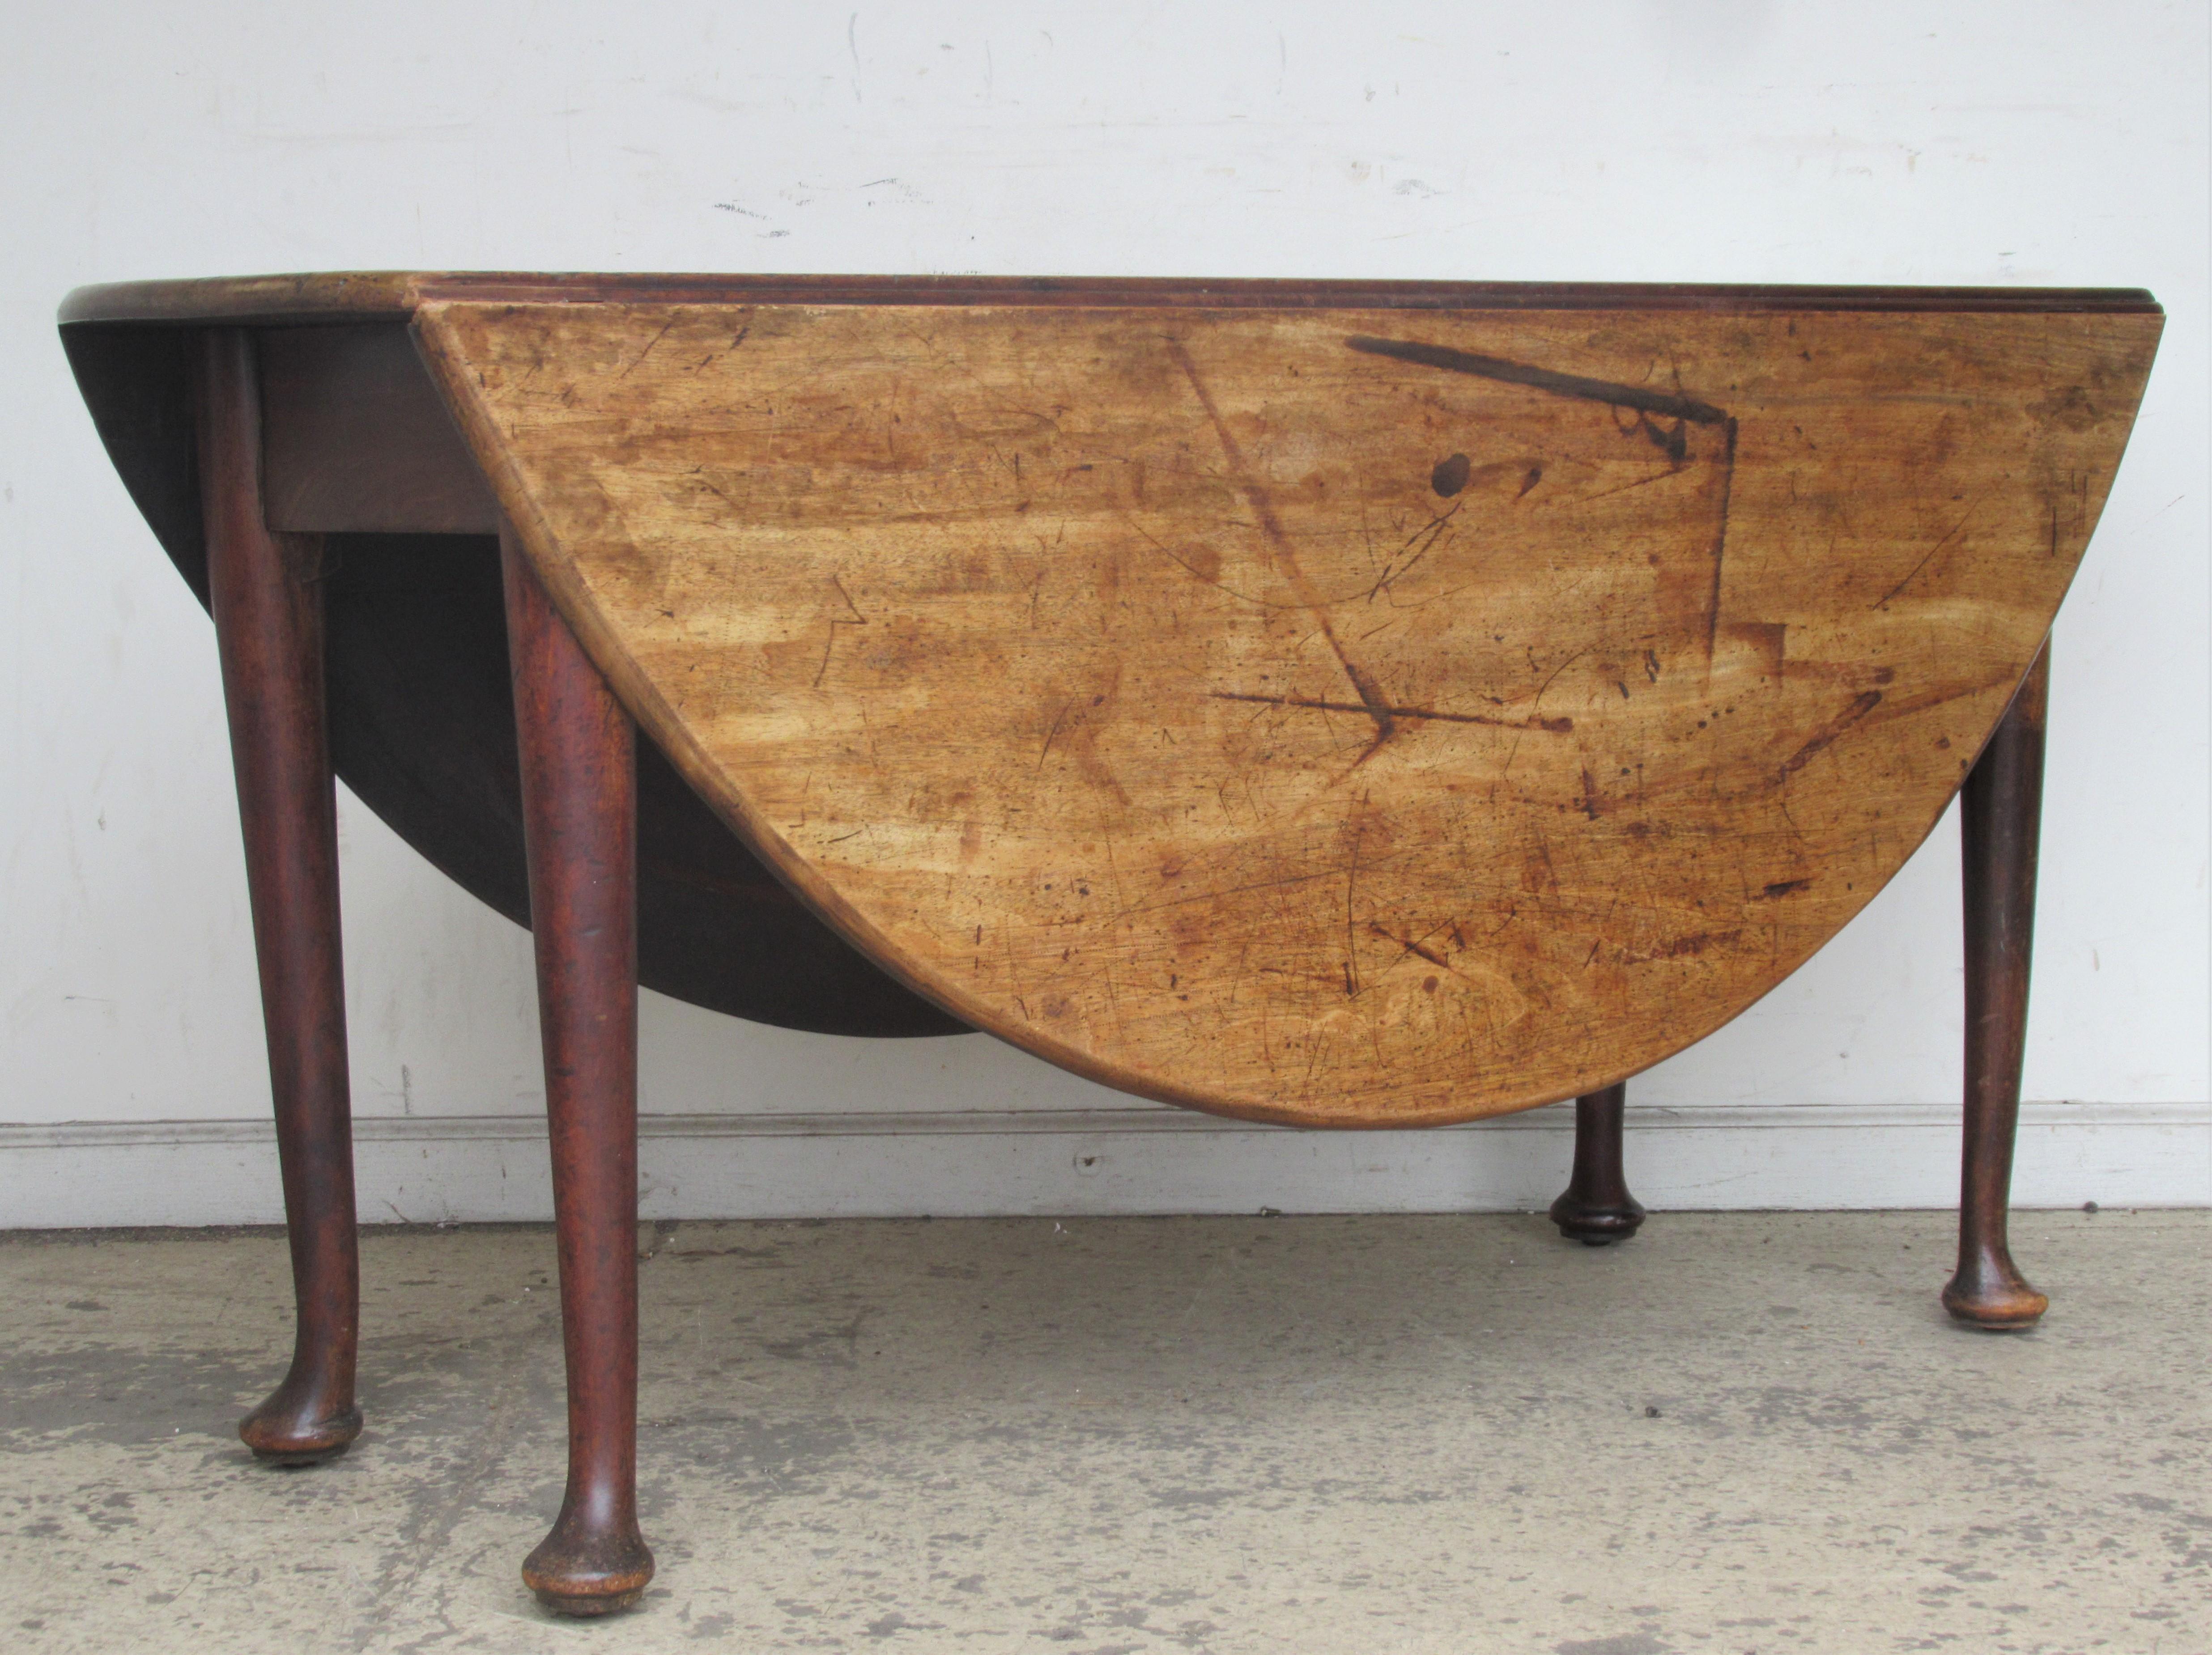 Maple 18th Century American Queen Anne Drop-Leaf Table